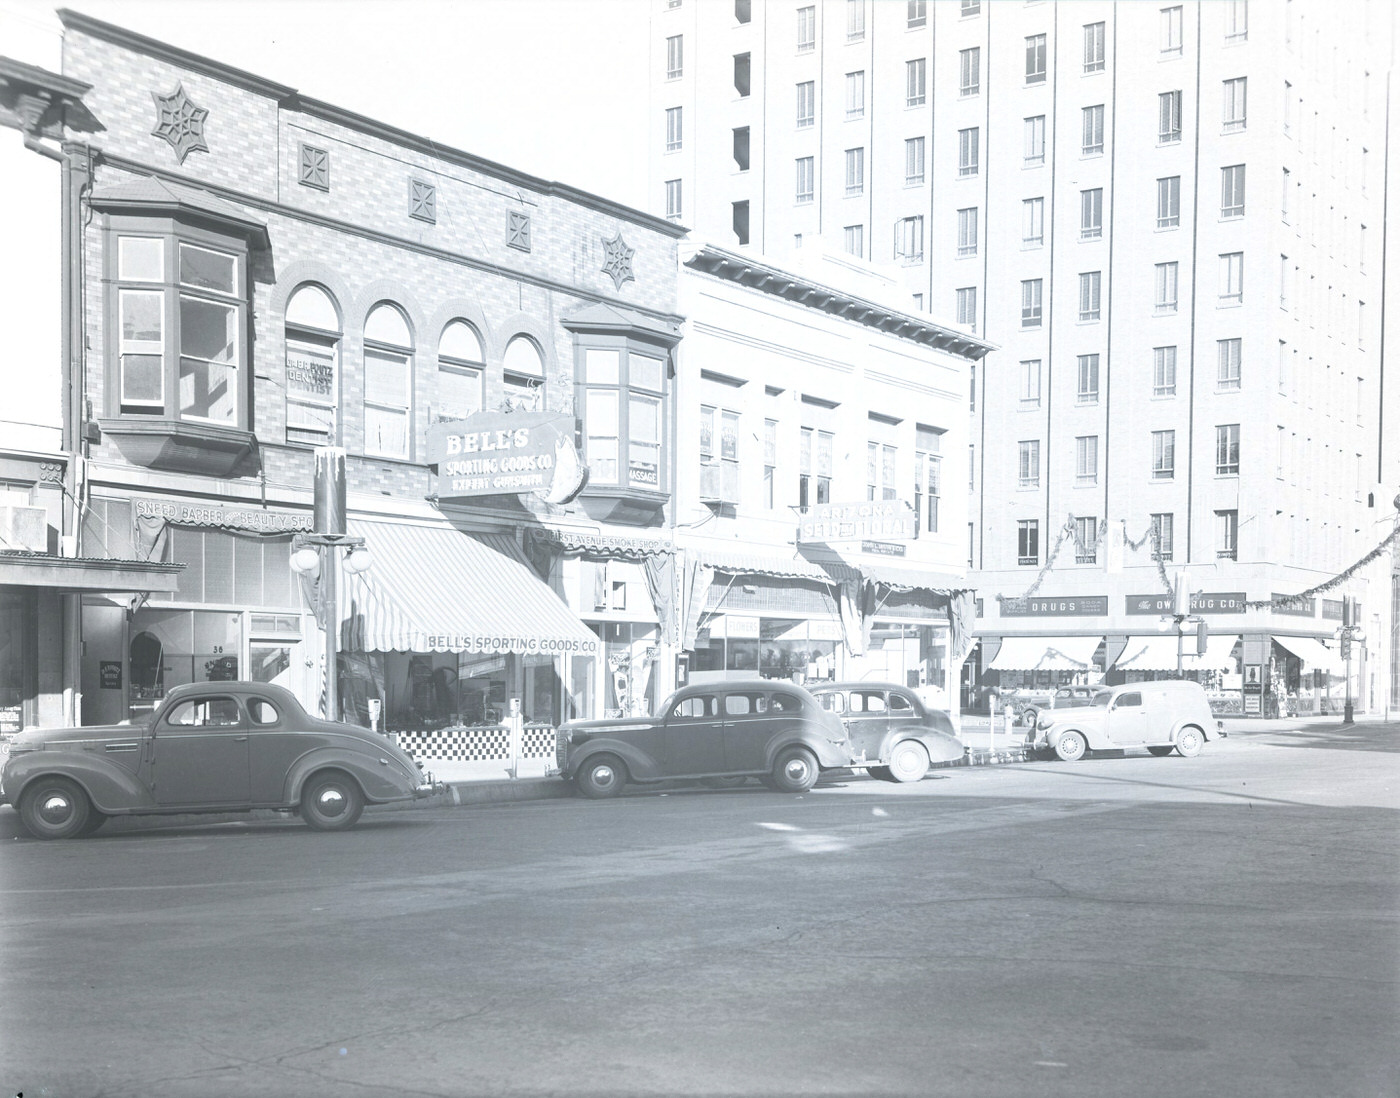 N. 1st Avenue. Depicts the 40 block of N. 1st Ave. Visible are Bell's Sporting Goods (40 N. 1st) and New Arizona Seed & Floral Co. (46 N. 1st), 1941